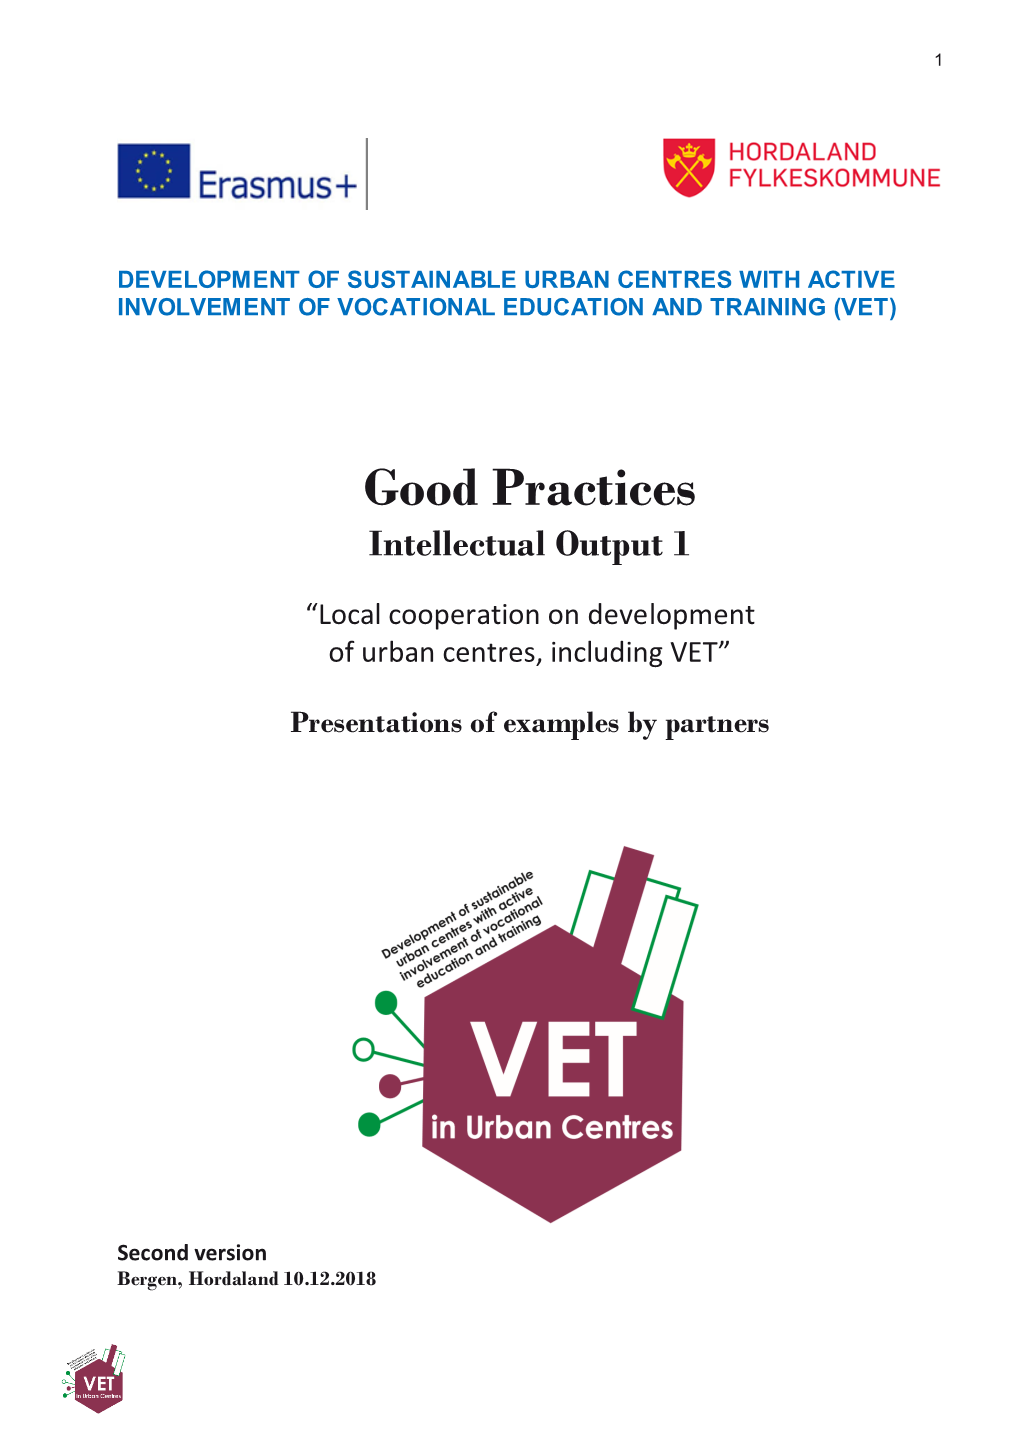 Good Practices Intellectual Output 1